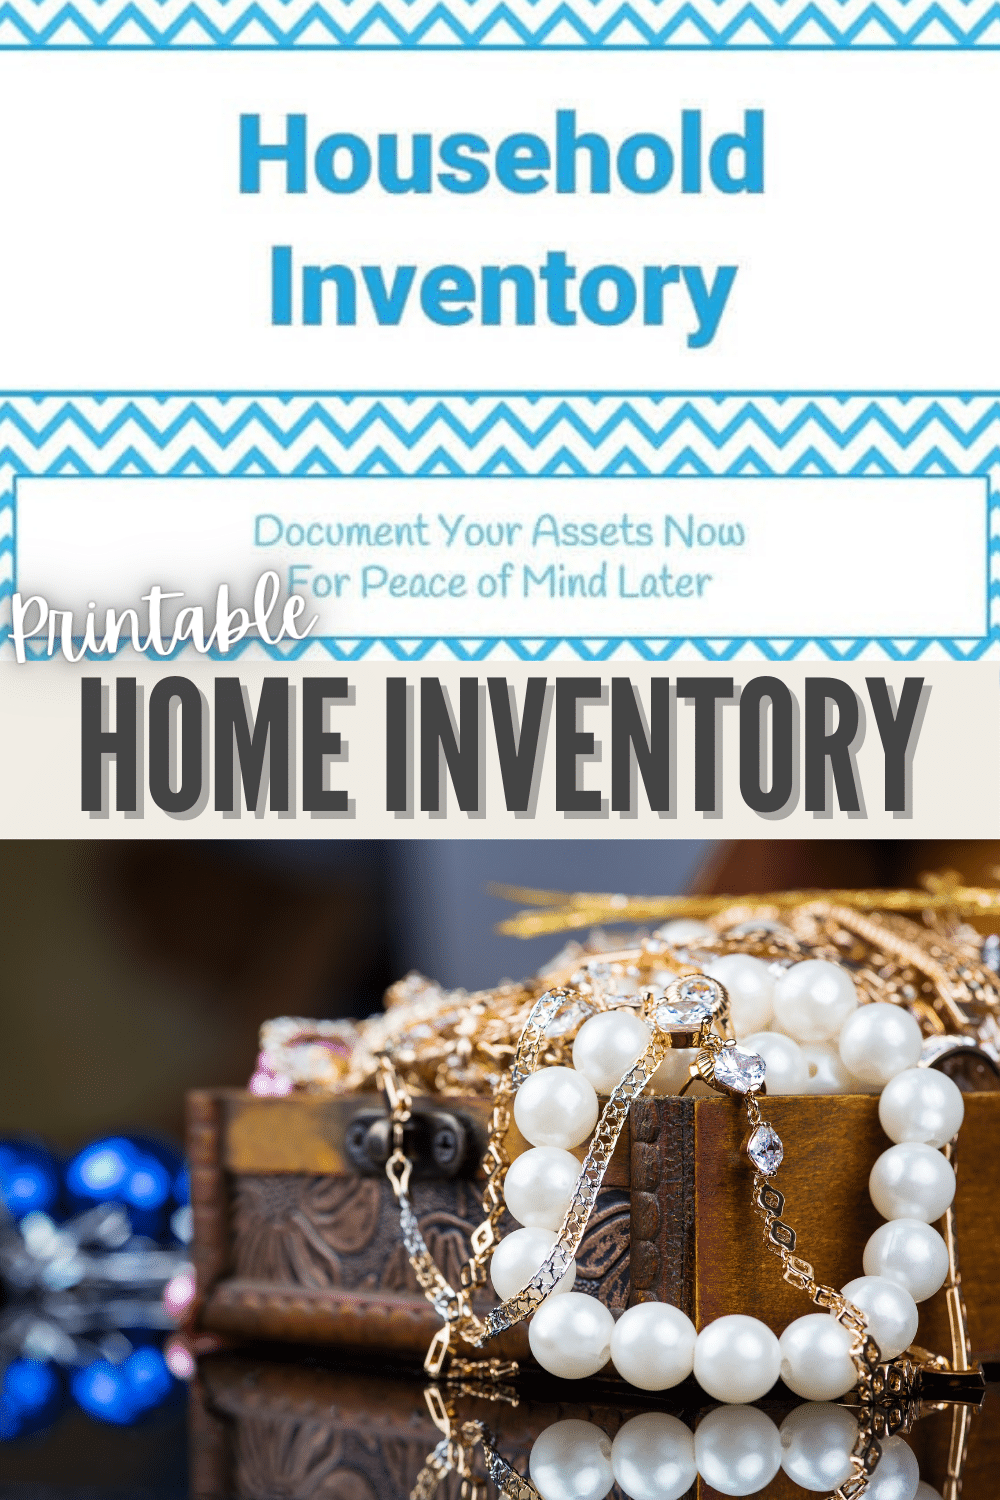 A huge 30+ page home inventory printable to help make cataloging your possessions easy. This printable household inventory packet covers every room. #printable #homeinventory #householdinventory via @wondermomwannab